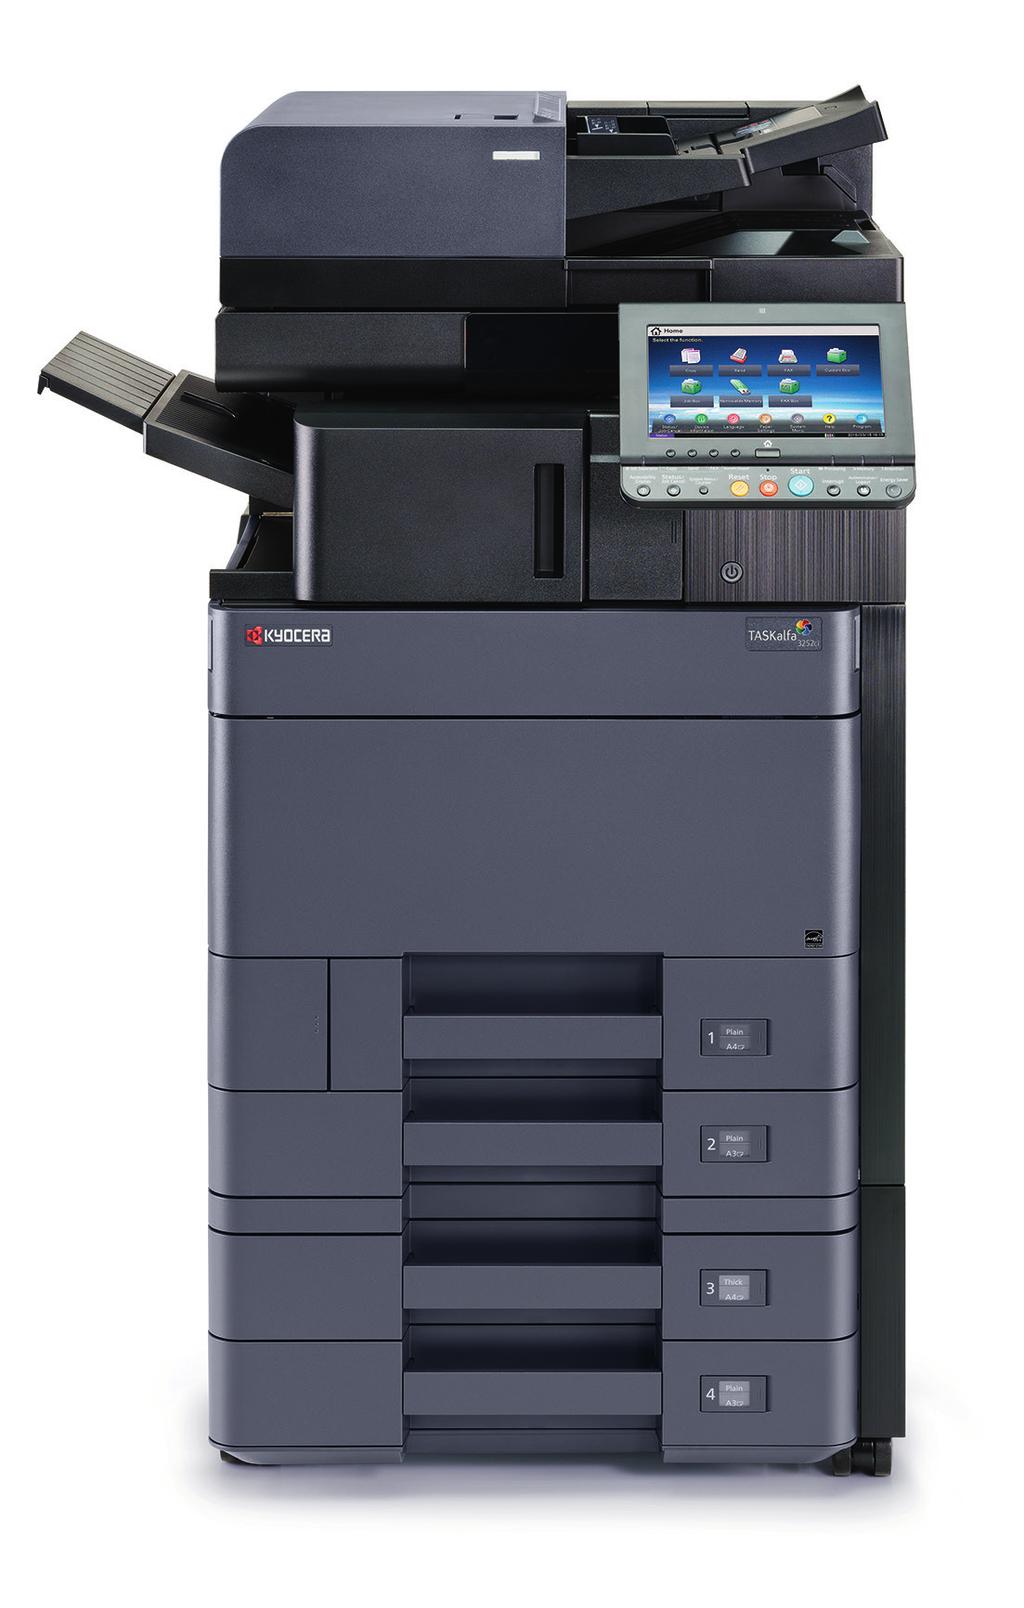 2 SINGLE PASS DUPLEX DOCUMENT PROCESSOR DP-7110 with a capacity of 270 sheets, scans